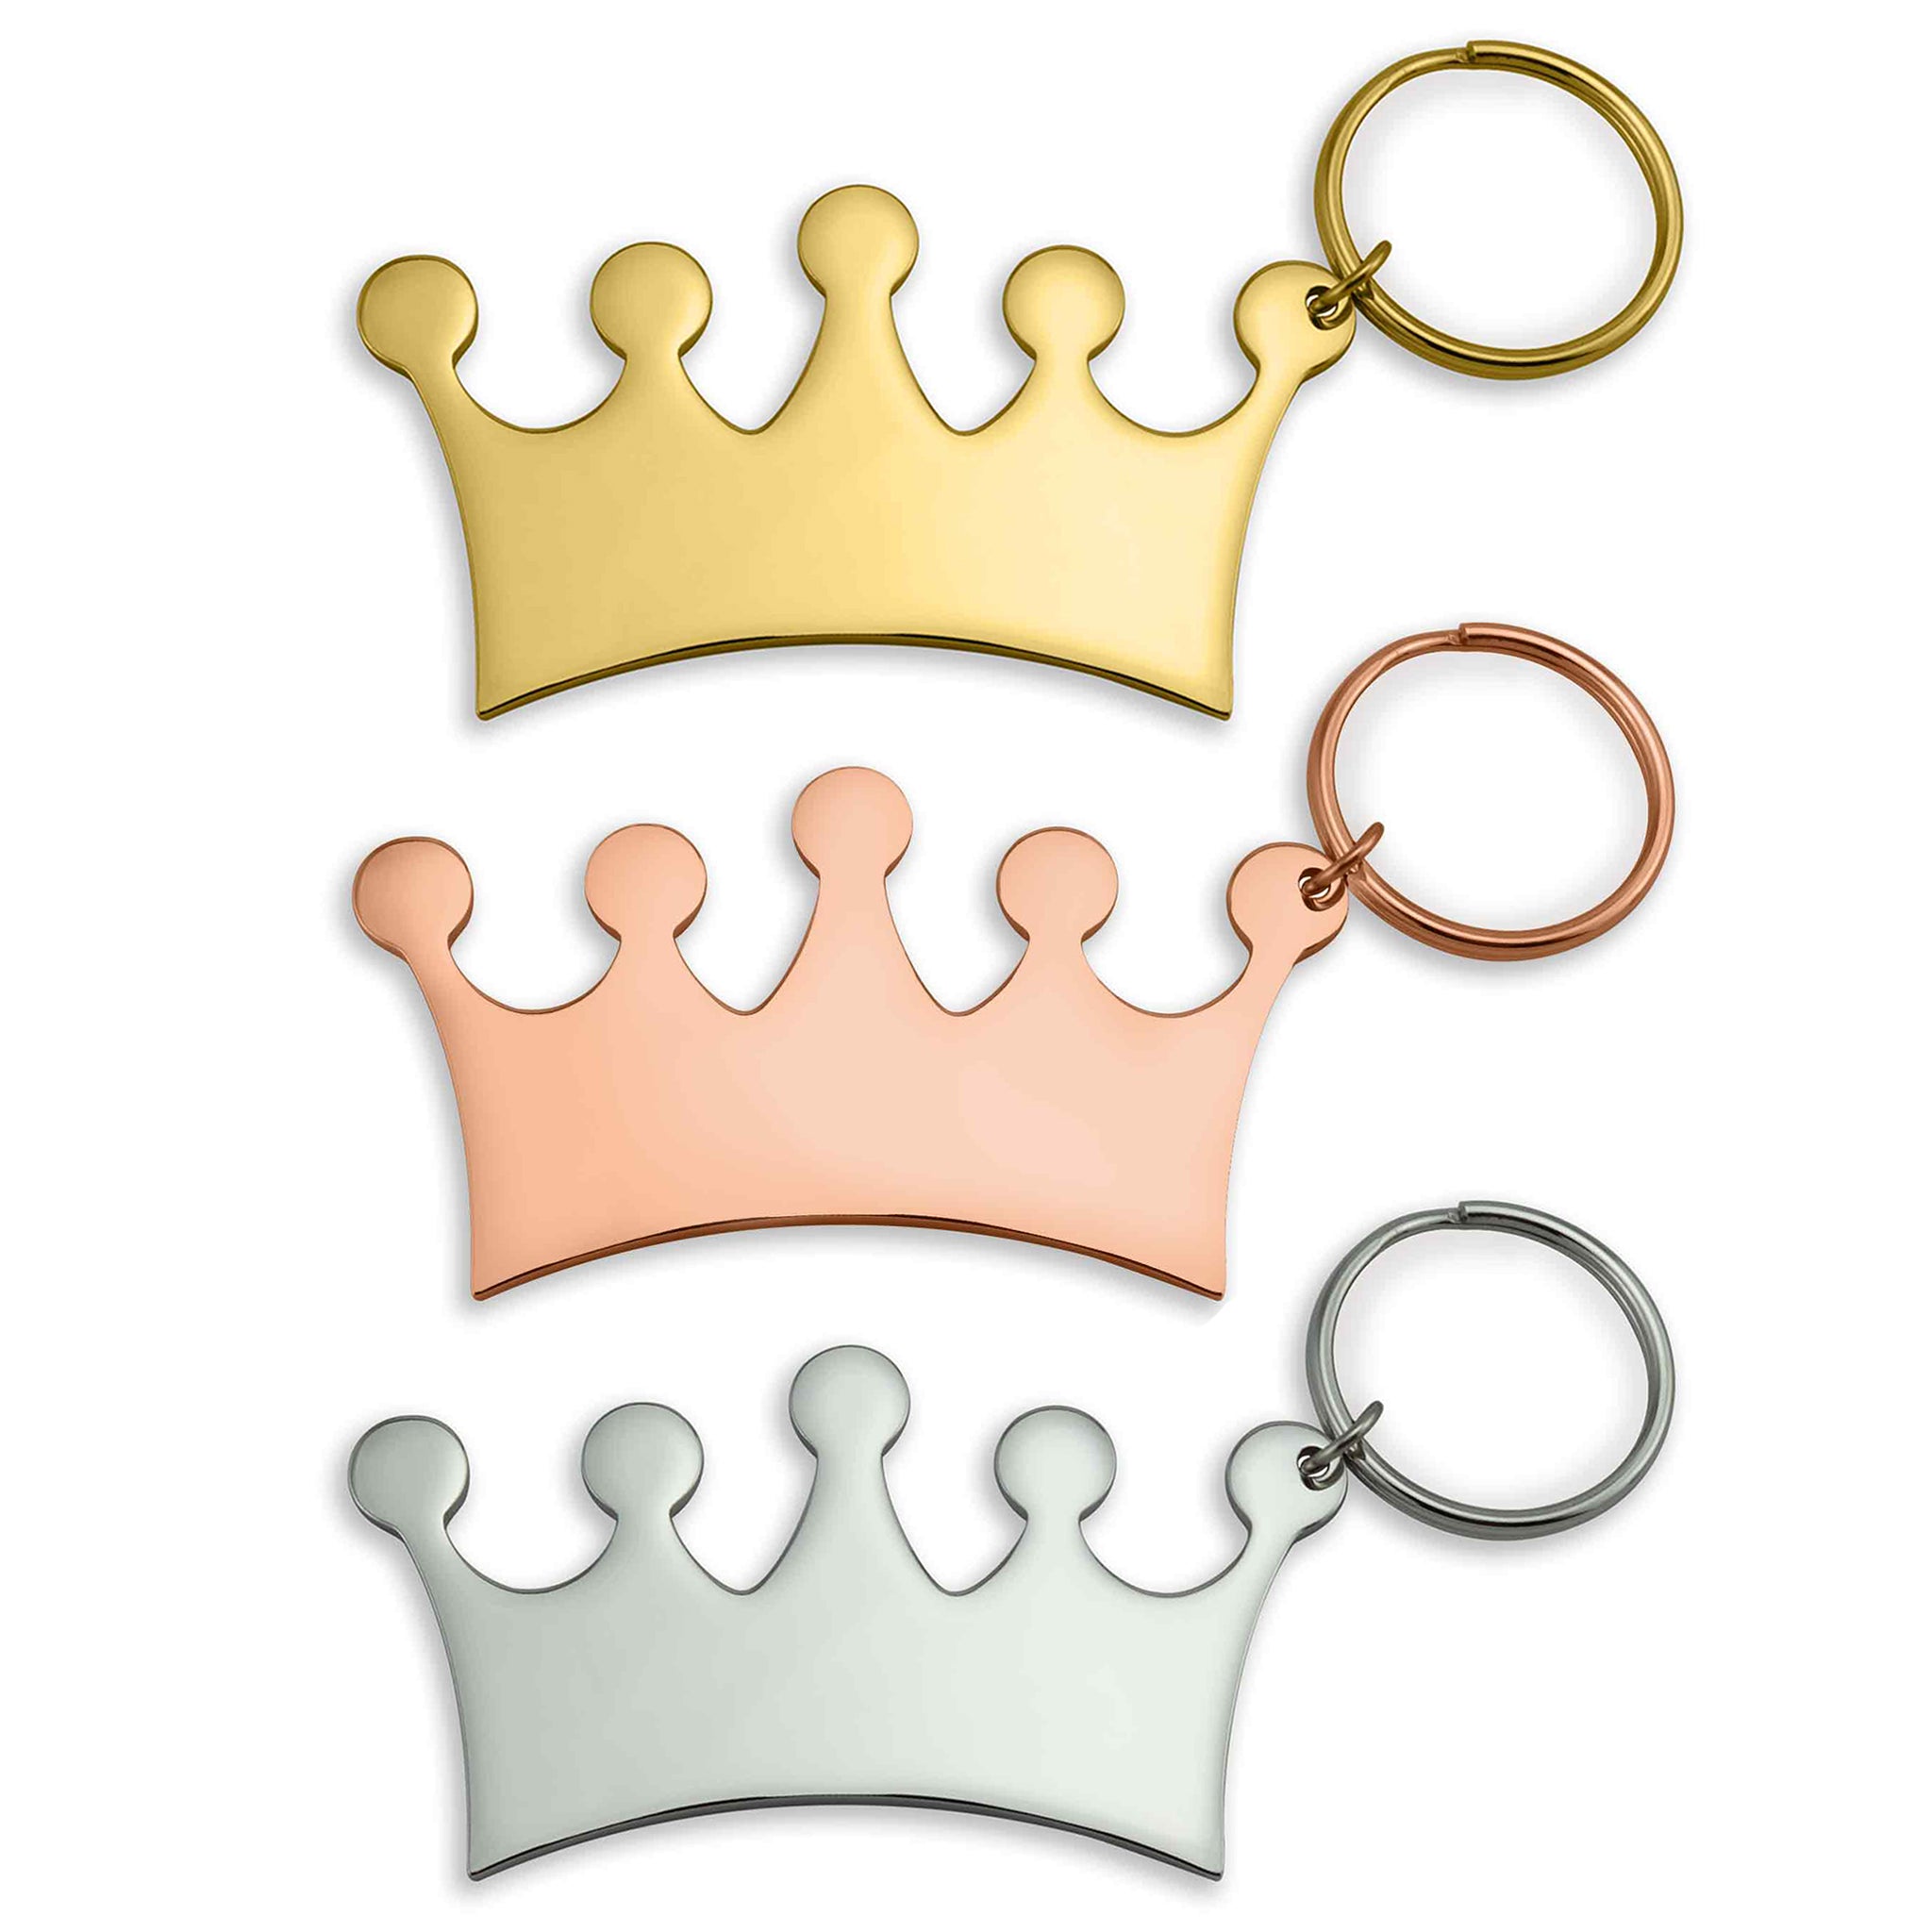 Engravable Crown Stainless Steel Keychain